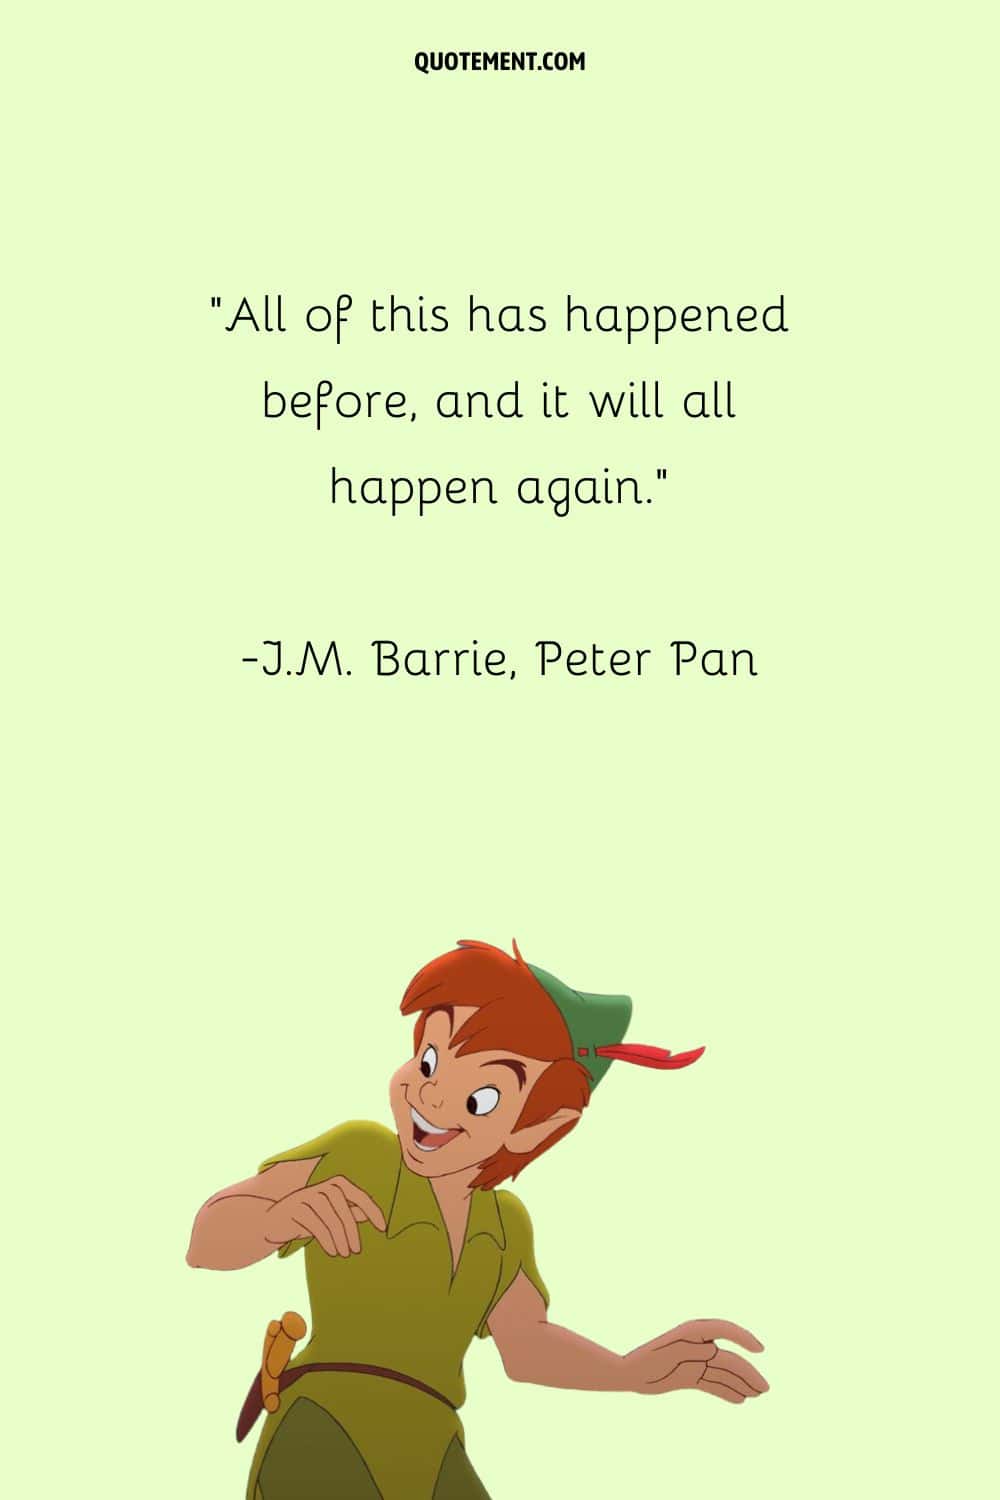 “All of this has happened before, and it will all happen again.” ― J.M. Barrie , Peter Pan